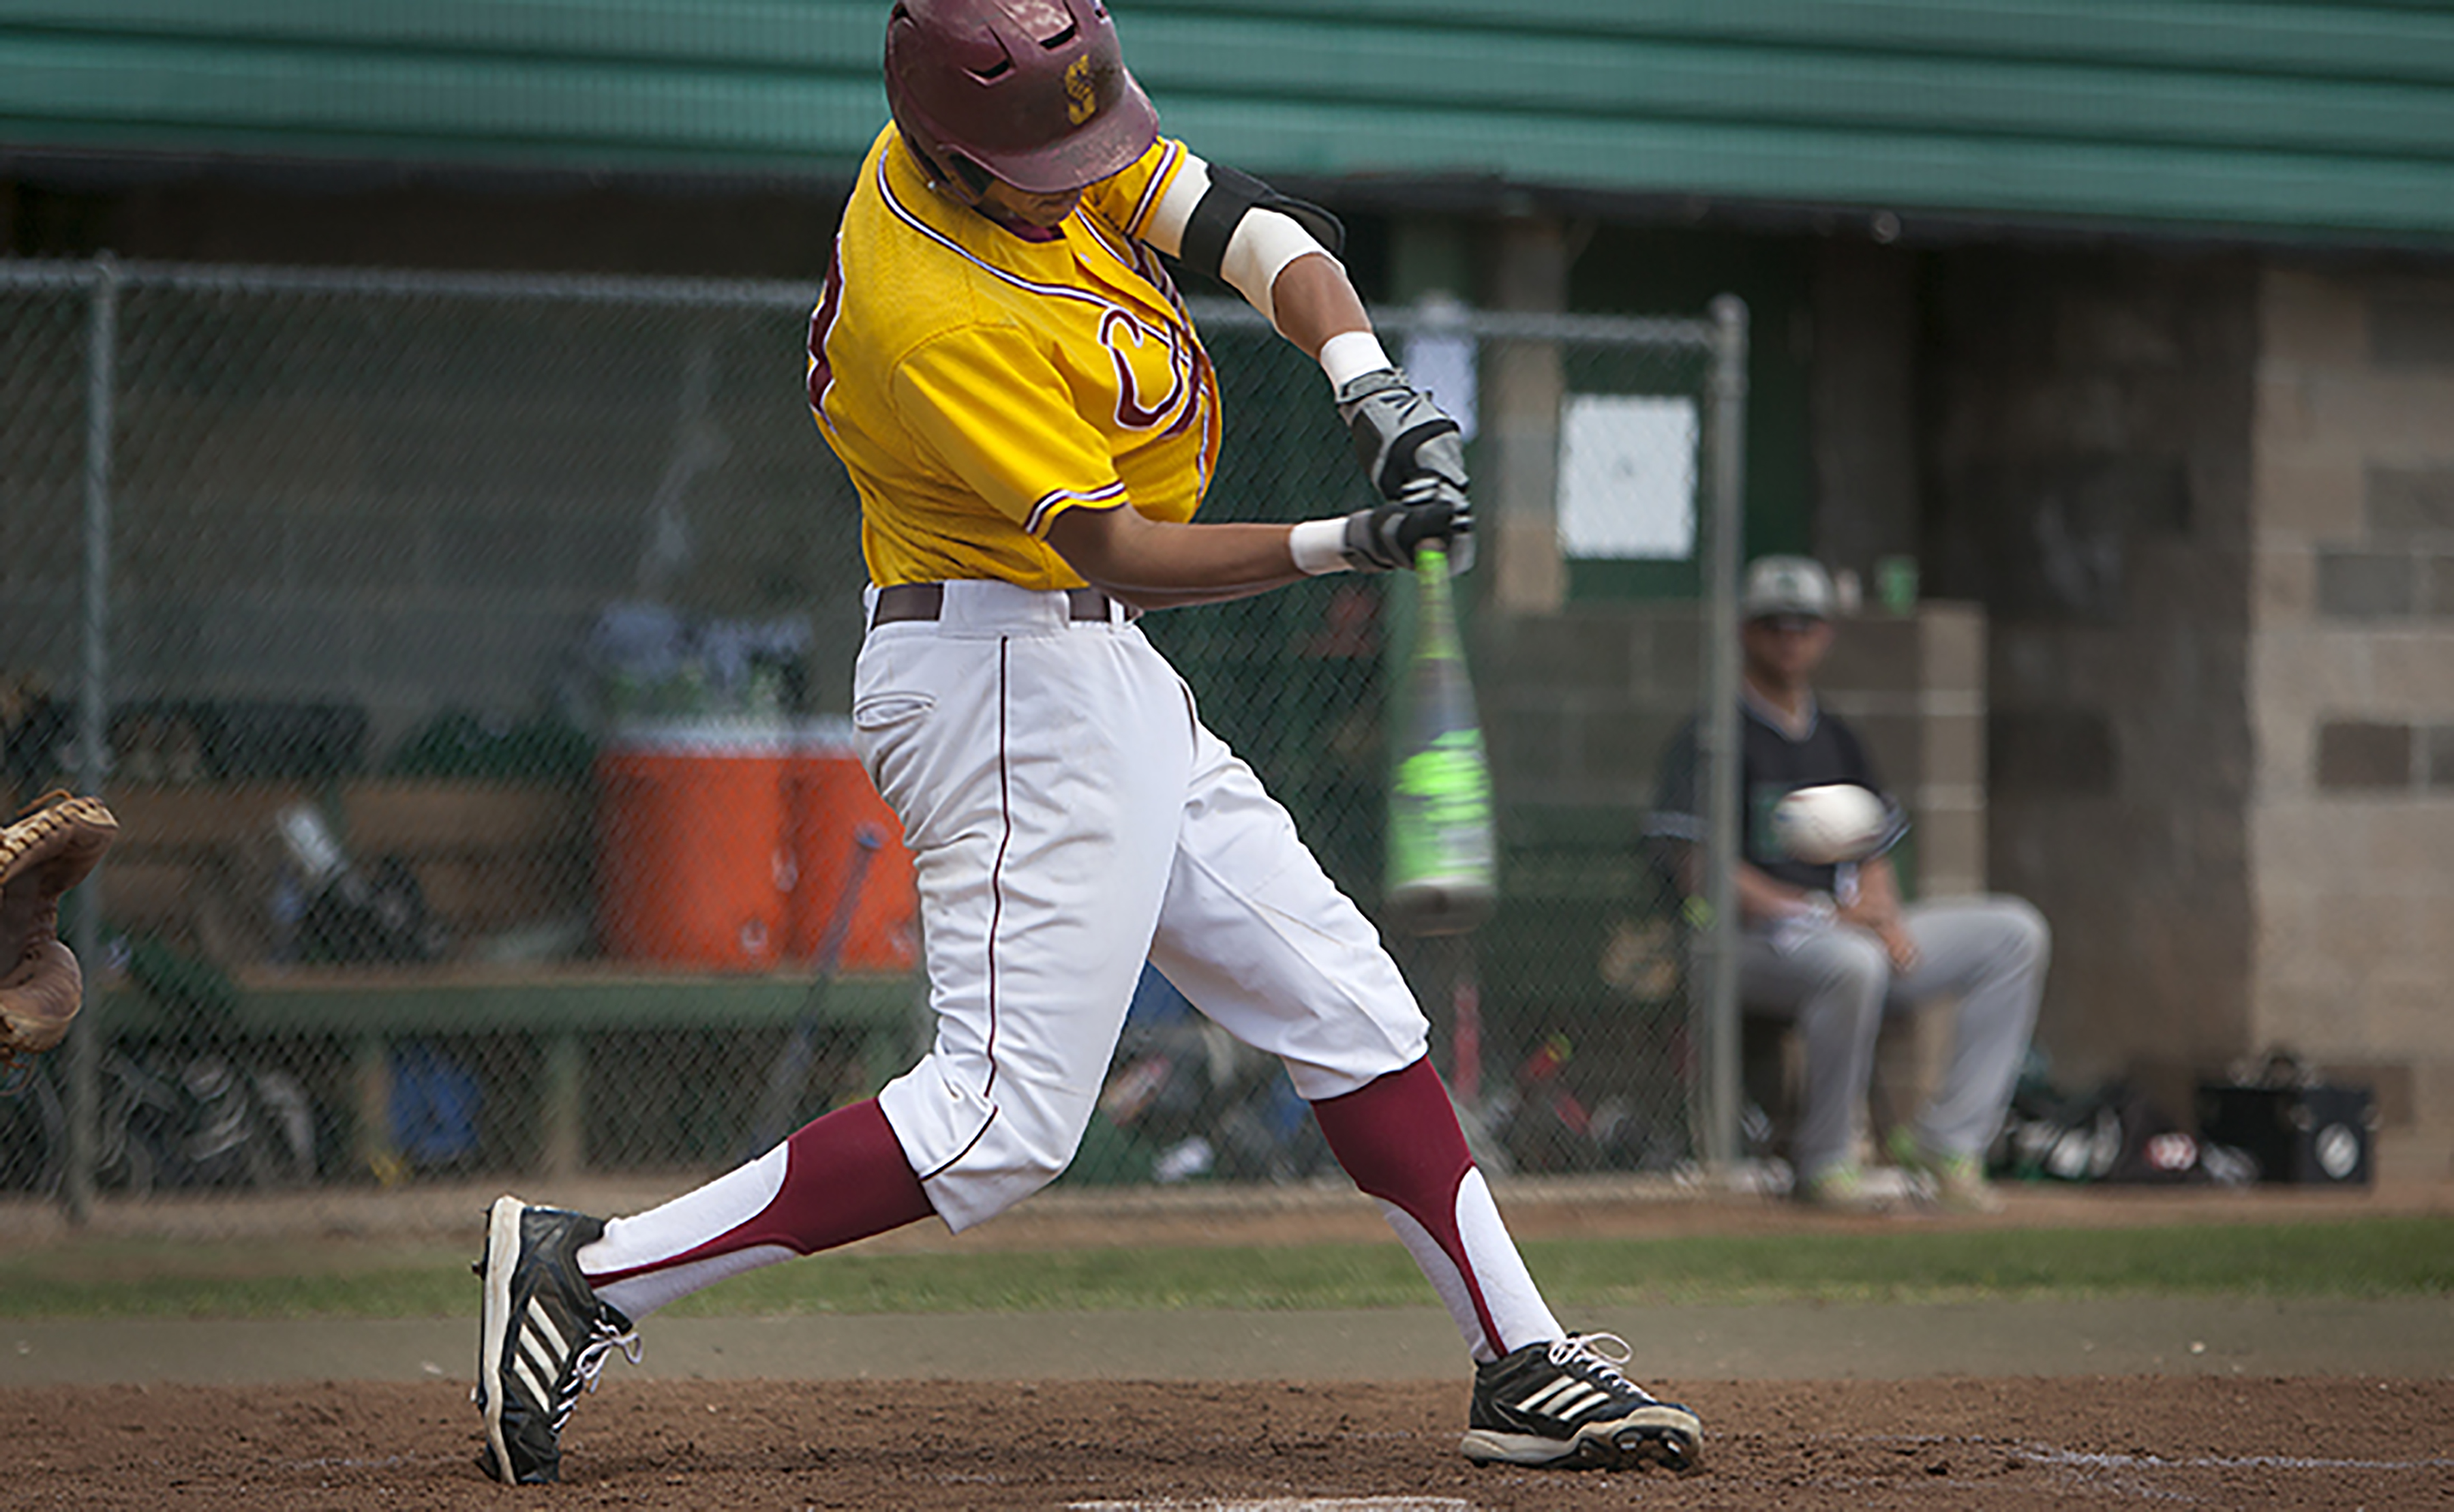 City College freshman Shaq Robinson, infielder, hits a double April 23 in the game against Diablo Valley College at Union Stadium. Photos by Dianne Rose. | dianne.rose.express@gmail.com